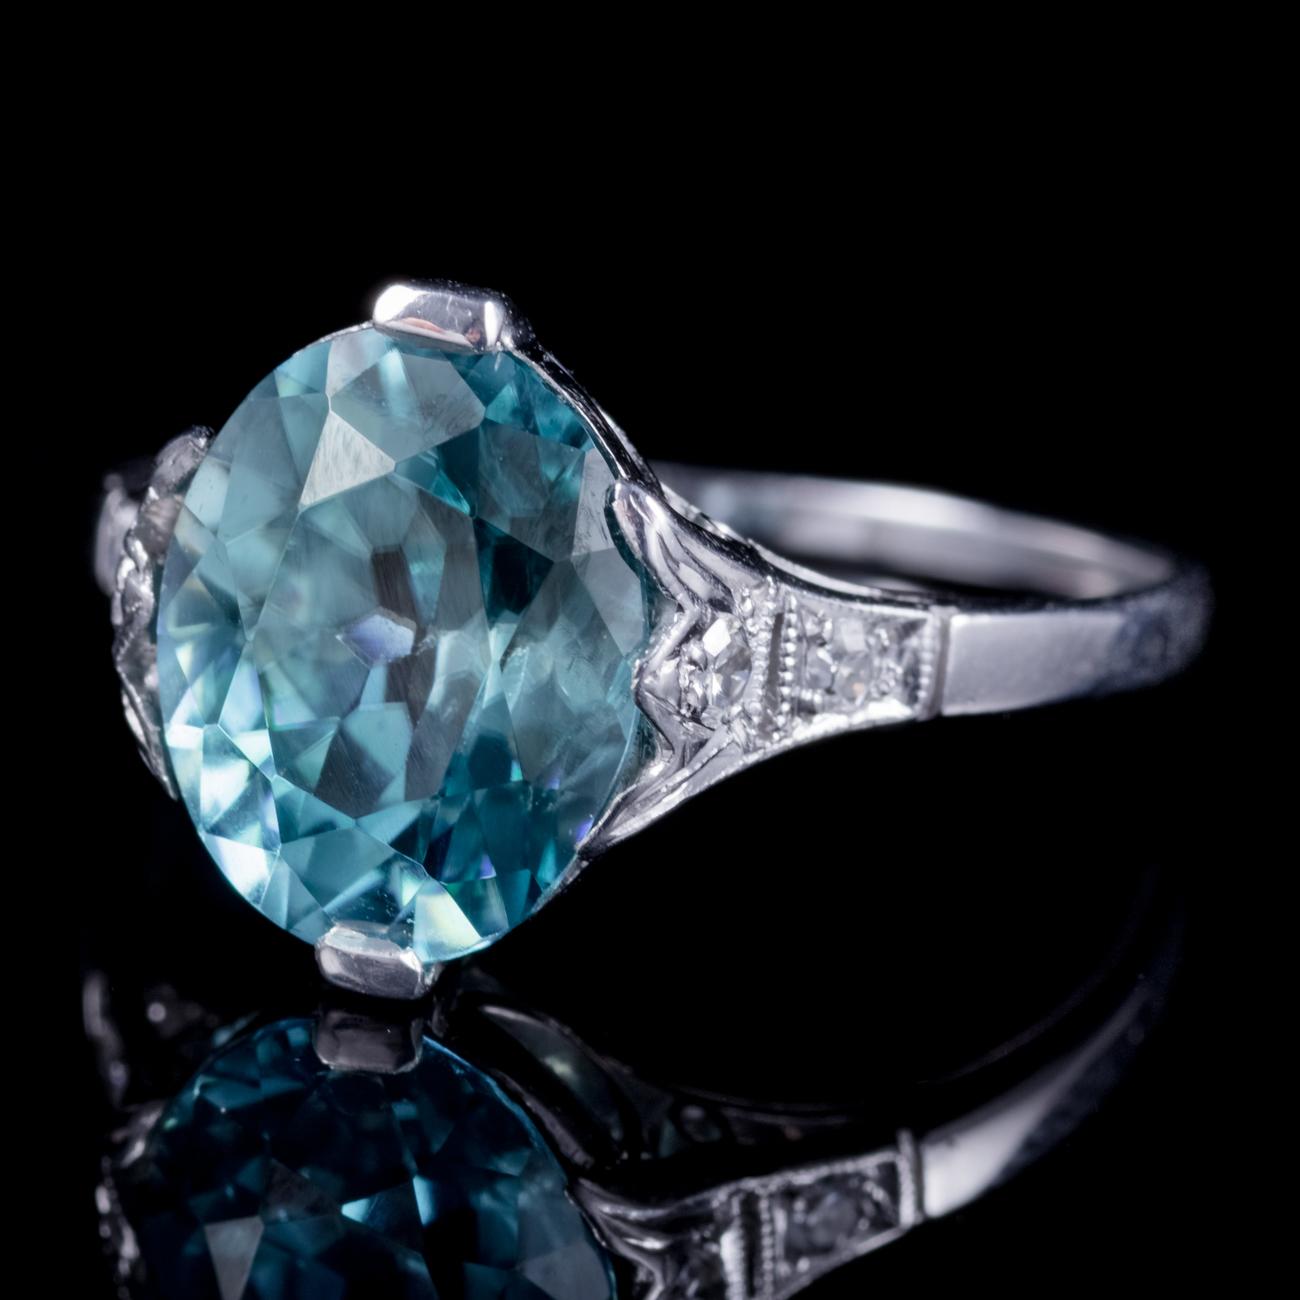 A stunning antique Edwardian ring adorned with a magnificent 4.43ct blue Zircon flanked by two Diamonds down each shoulder. Blue Zircon is a lovely shade of teal/ blue and was once said to bring prosperity and wisdom to its wearer. The stone is set